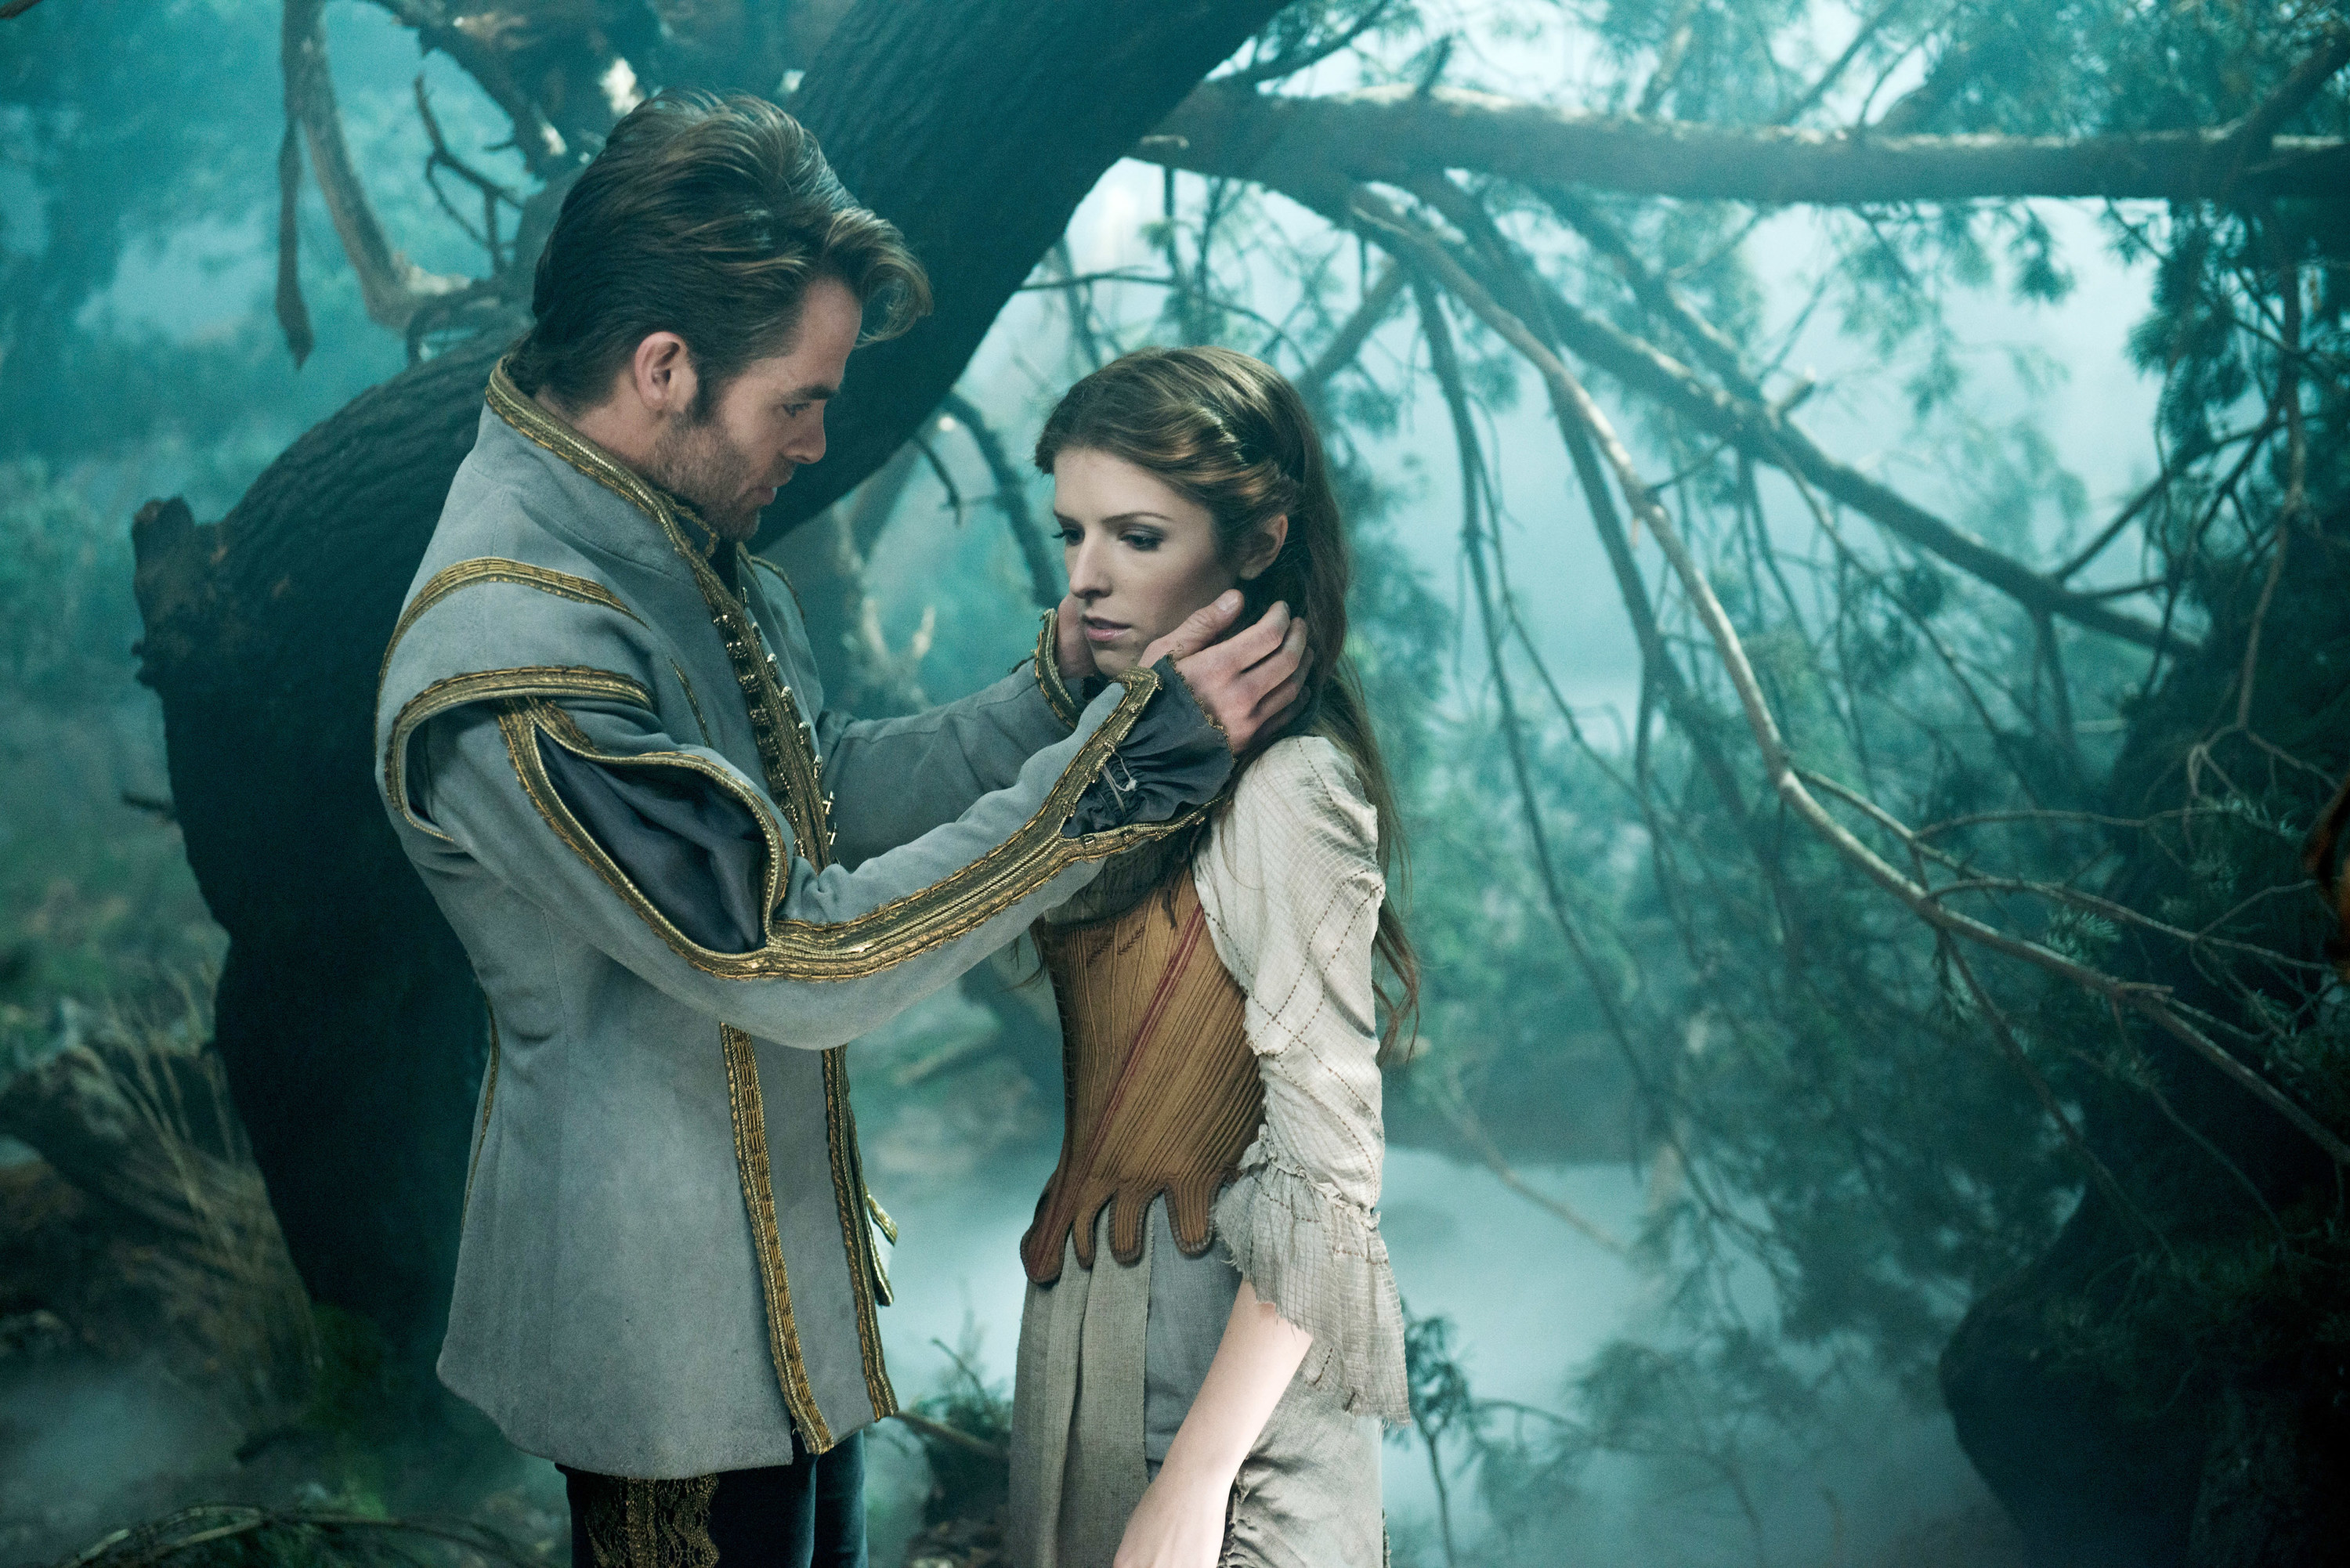 Chris Pine and Anna Kendrick in the woods